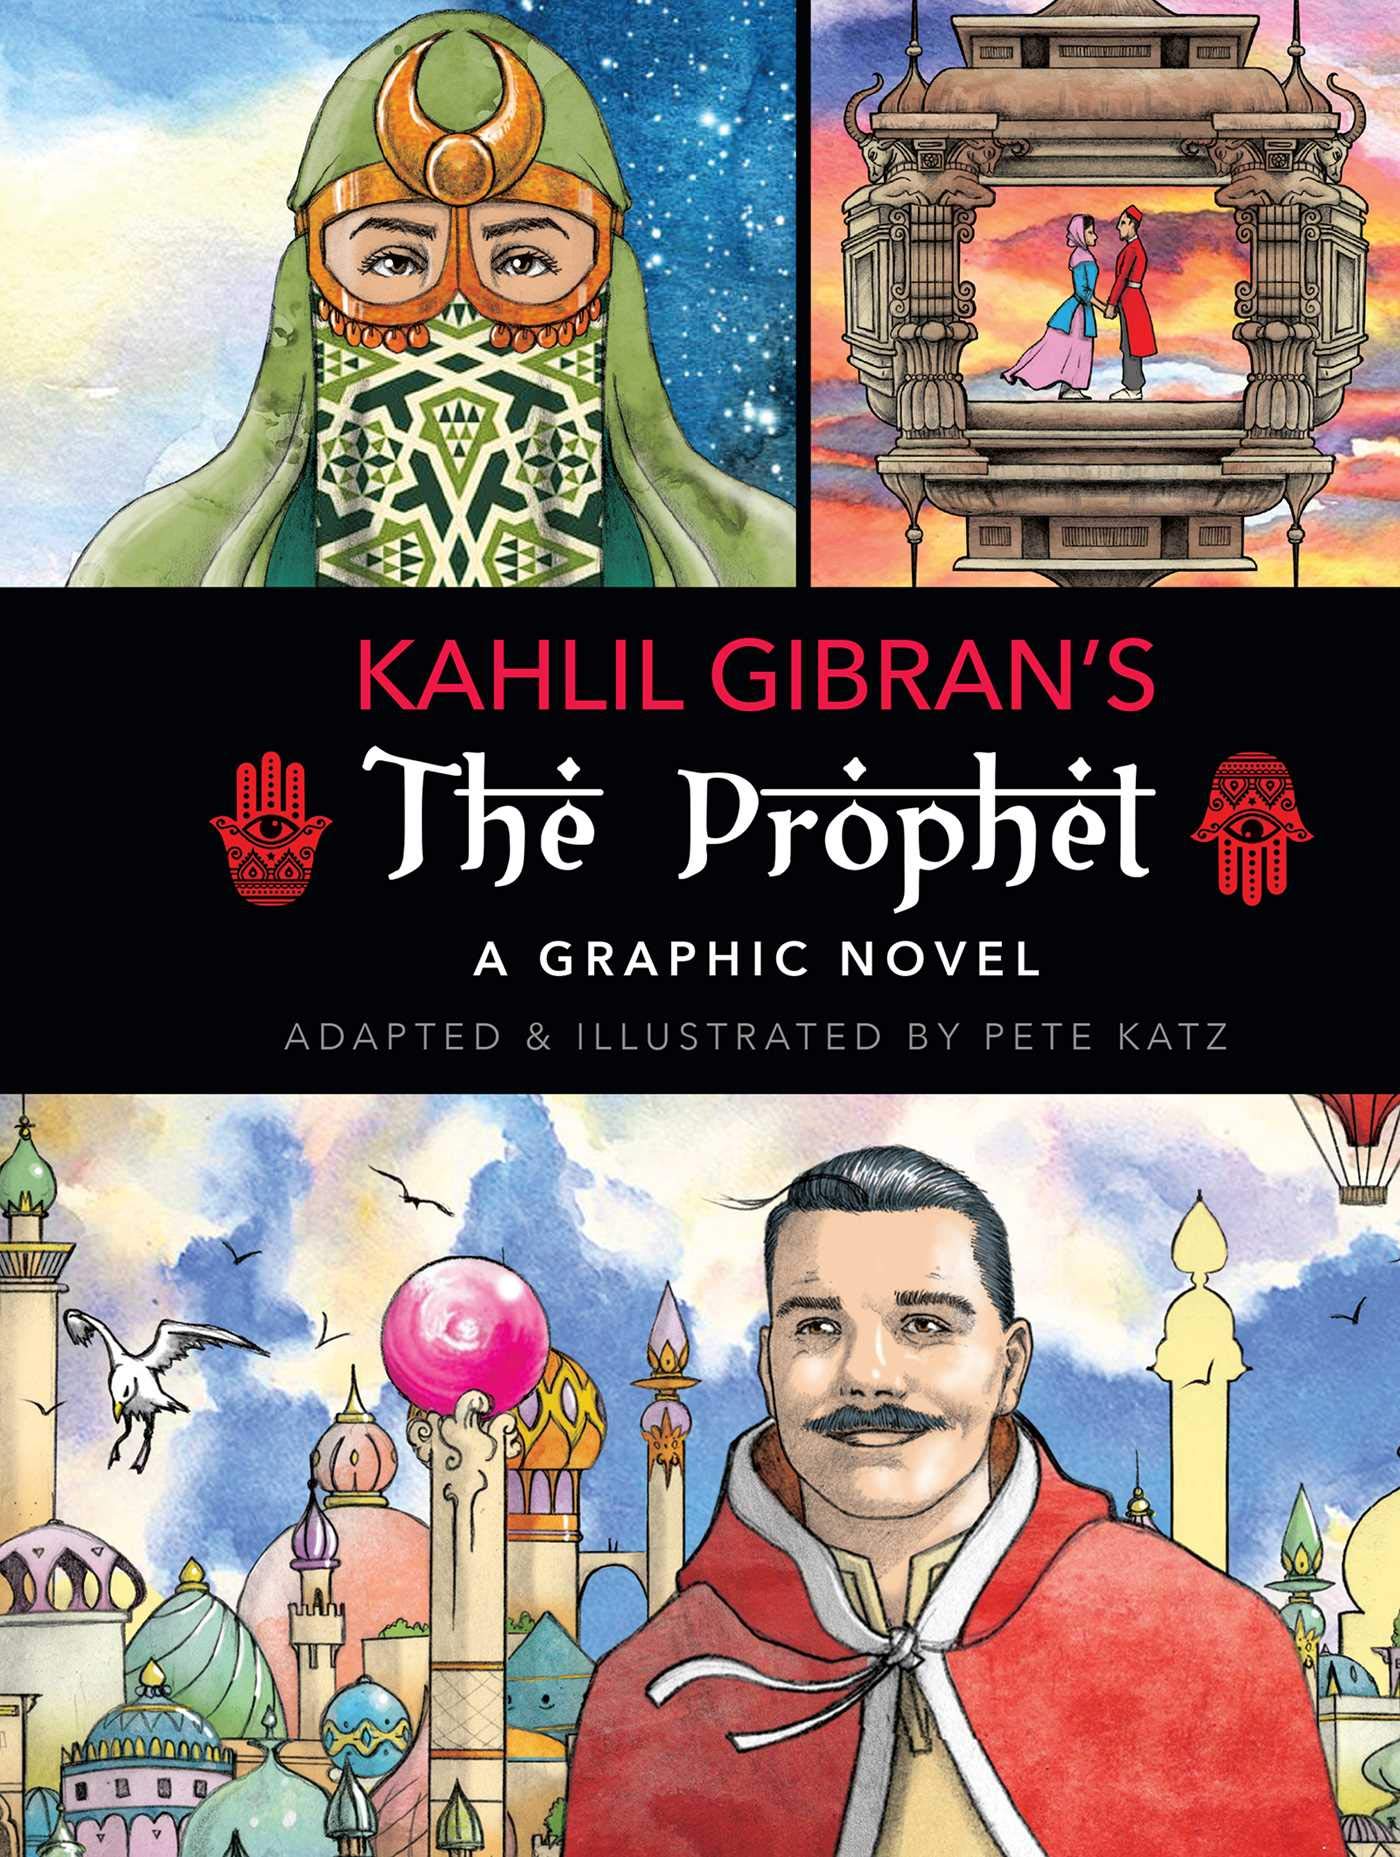 Cover of The Prophet adapted by Pete Katz